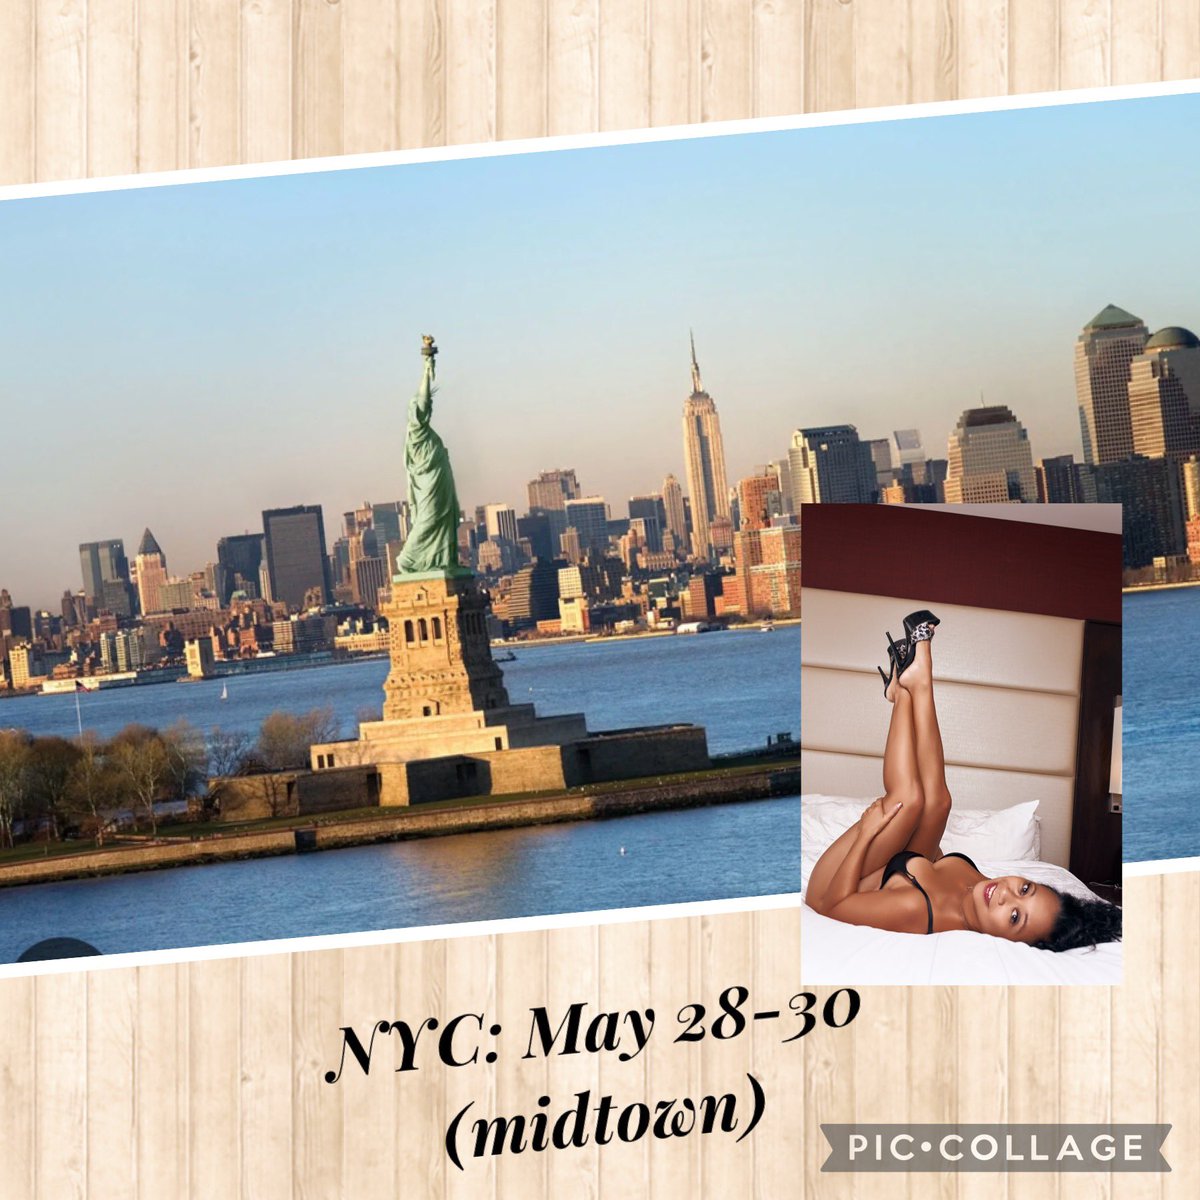 Just a reminder, I’ll be in NYC May 28-30. For booking info: ClubLuckyStarr@aol.com